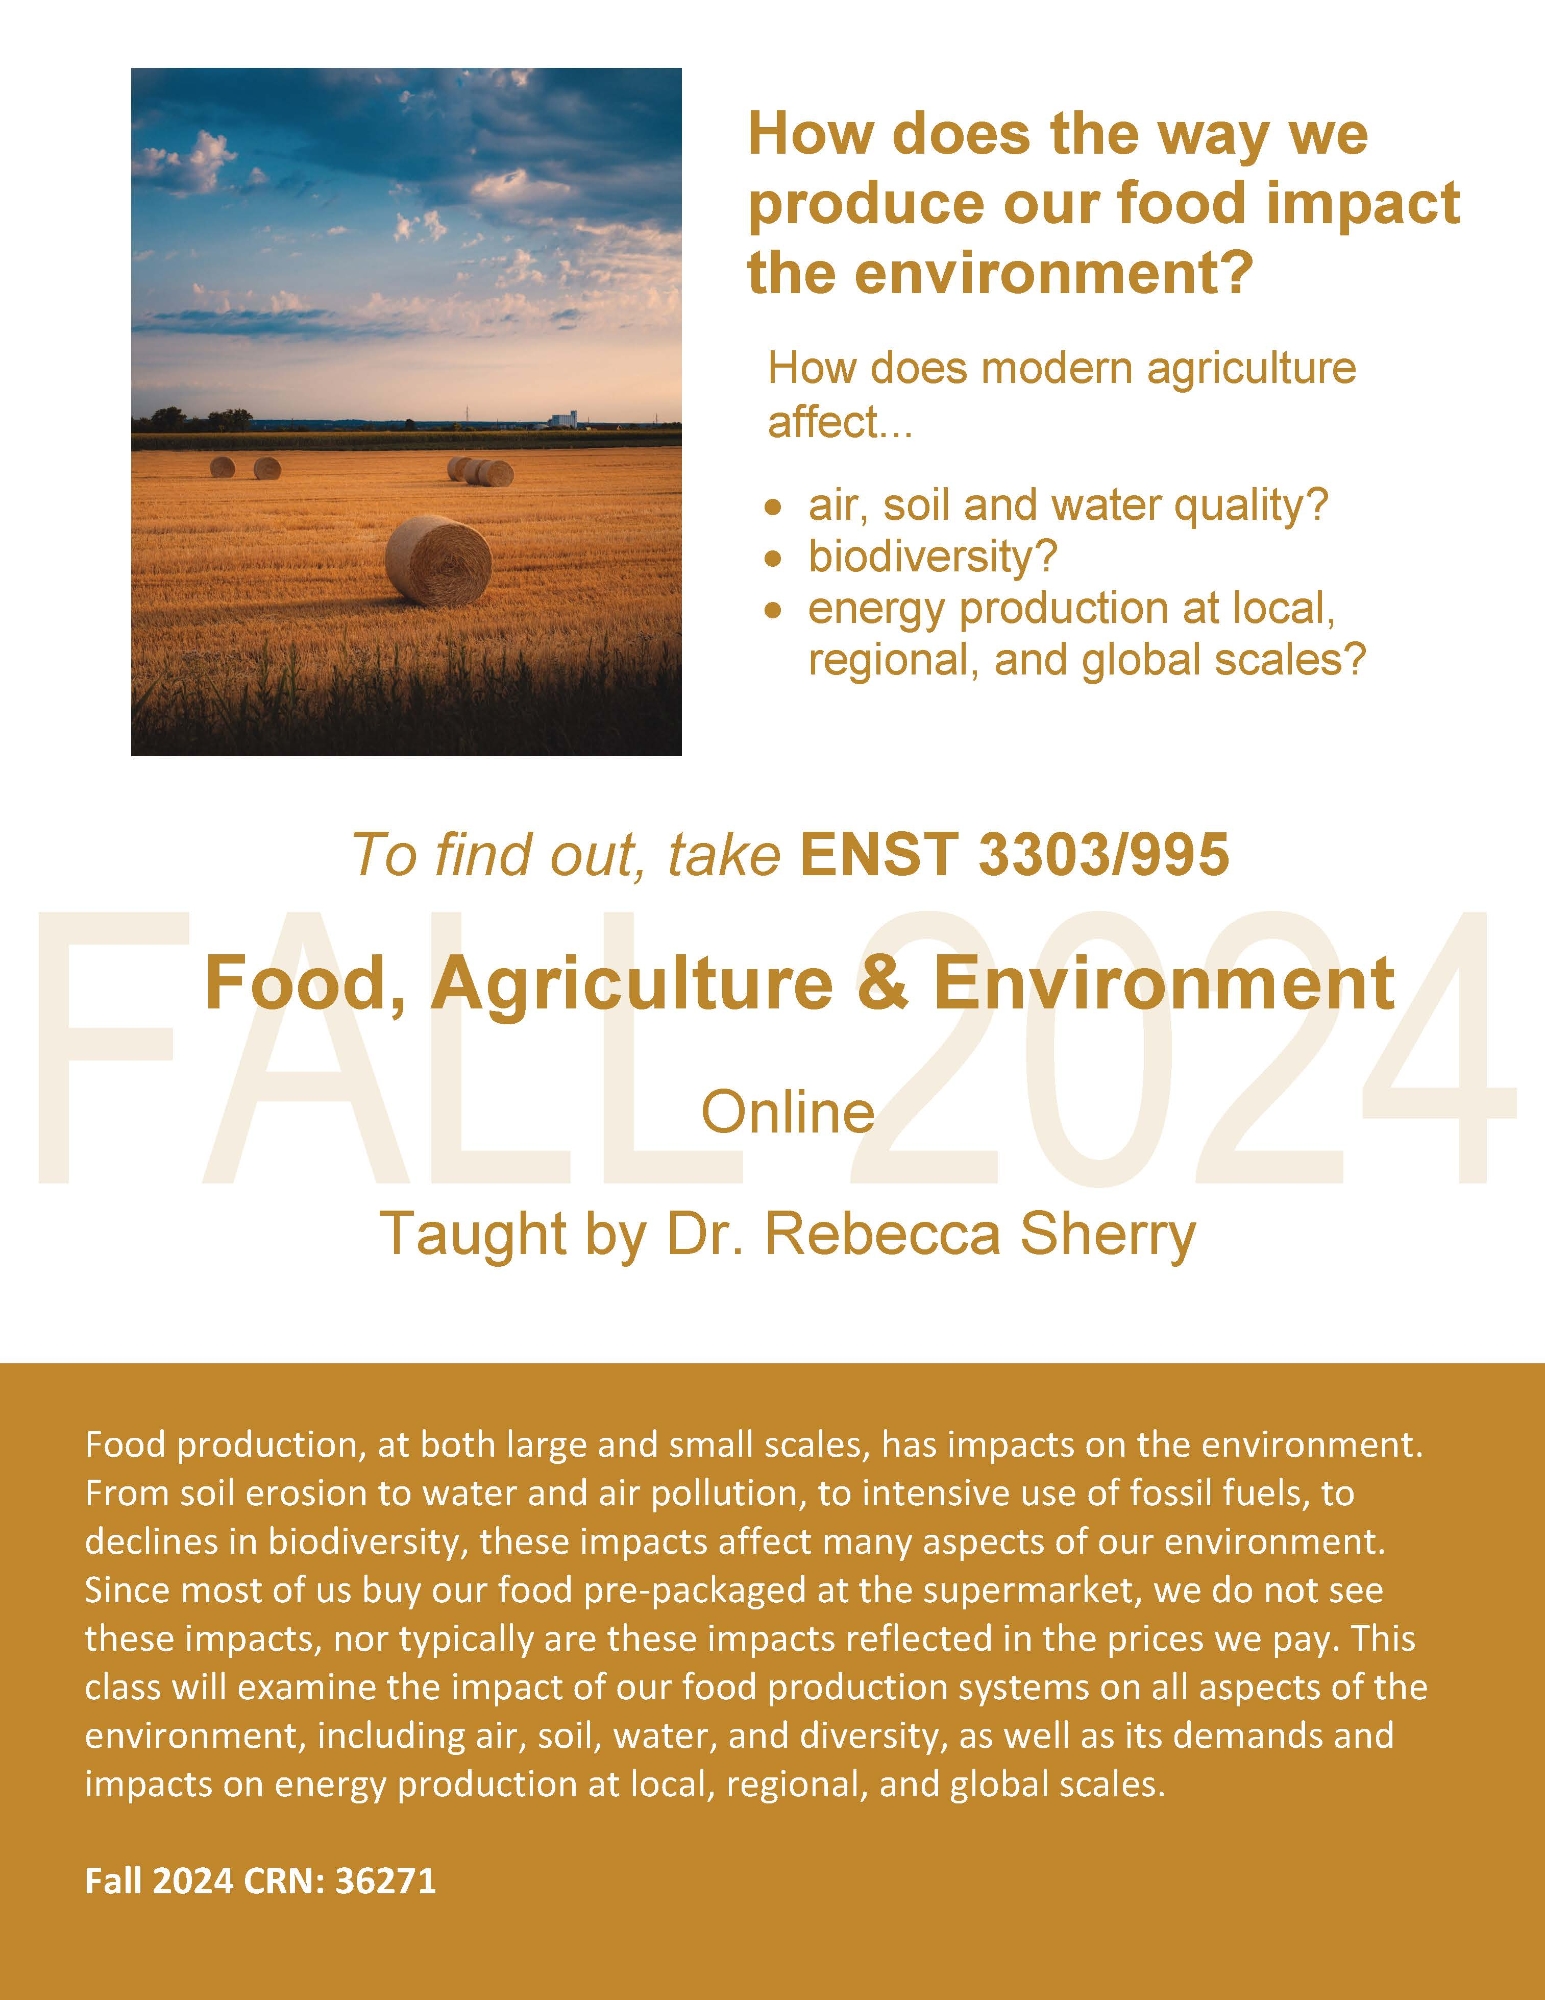 How does the way we produce our food impact the environment? • air, soil and water quality? • biodiversity? • energy production at local, regional, and global scales? How does modern agriculture affect... To find out, take ENST 3303/995 Food, Agriculture & Environment Online Taught by Dr. Rebecca Sherry Food production, at both large and small scales, has impacts on the environment. From soil erosion to water and air pollution, to intensive use of fossil fuels, to declines in biodiversity, these impacts affect many aspects of our environment. Since most of us buy our food pre-packaged at the supermarket, we do not see these impacts, nor typically are these impacts reflected in the prices we pay. This class will examine the impact of our food production systems on all aspects of the environment, including air, soil, water, and diversity, as well as its demands and impacts on energy production at local, regional, and global scales. Fall 2024 CRN: 36271